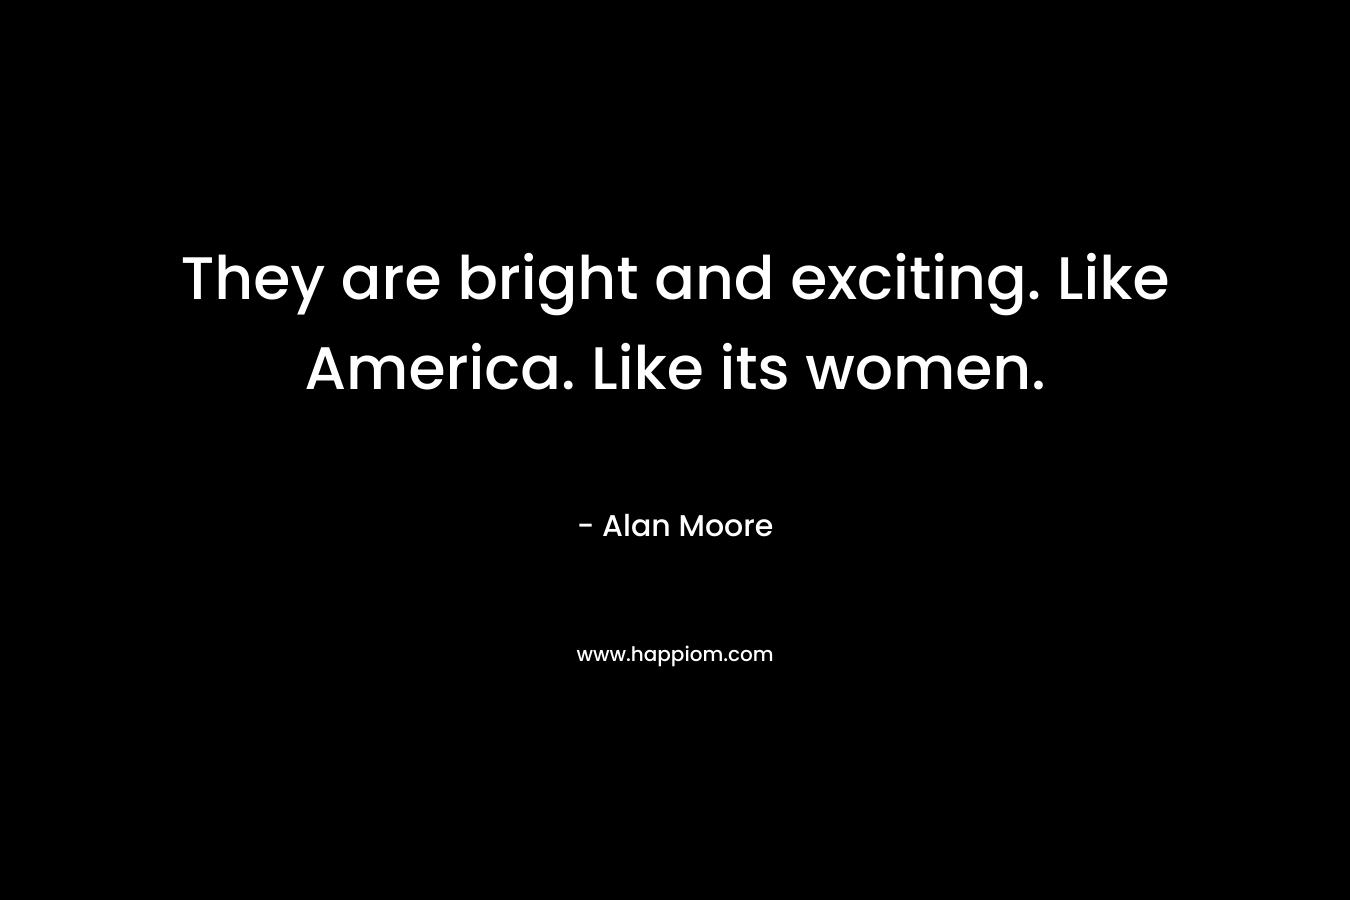 They are bright and exciting. Like America. Like its women.